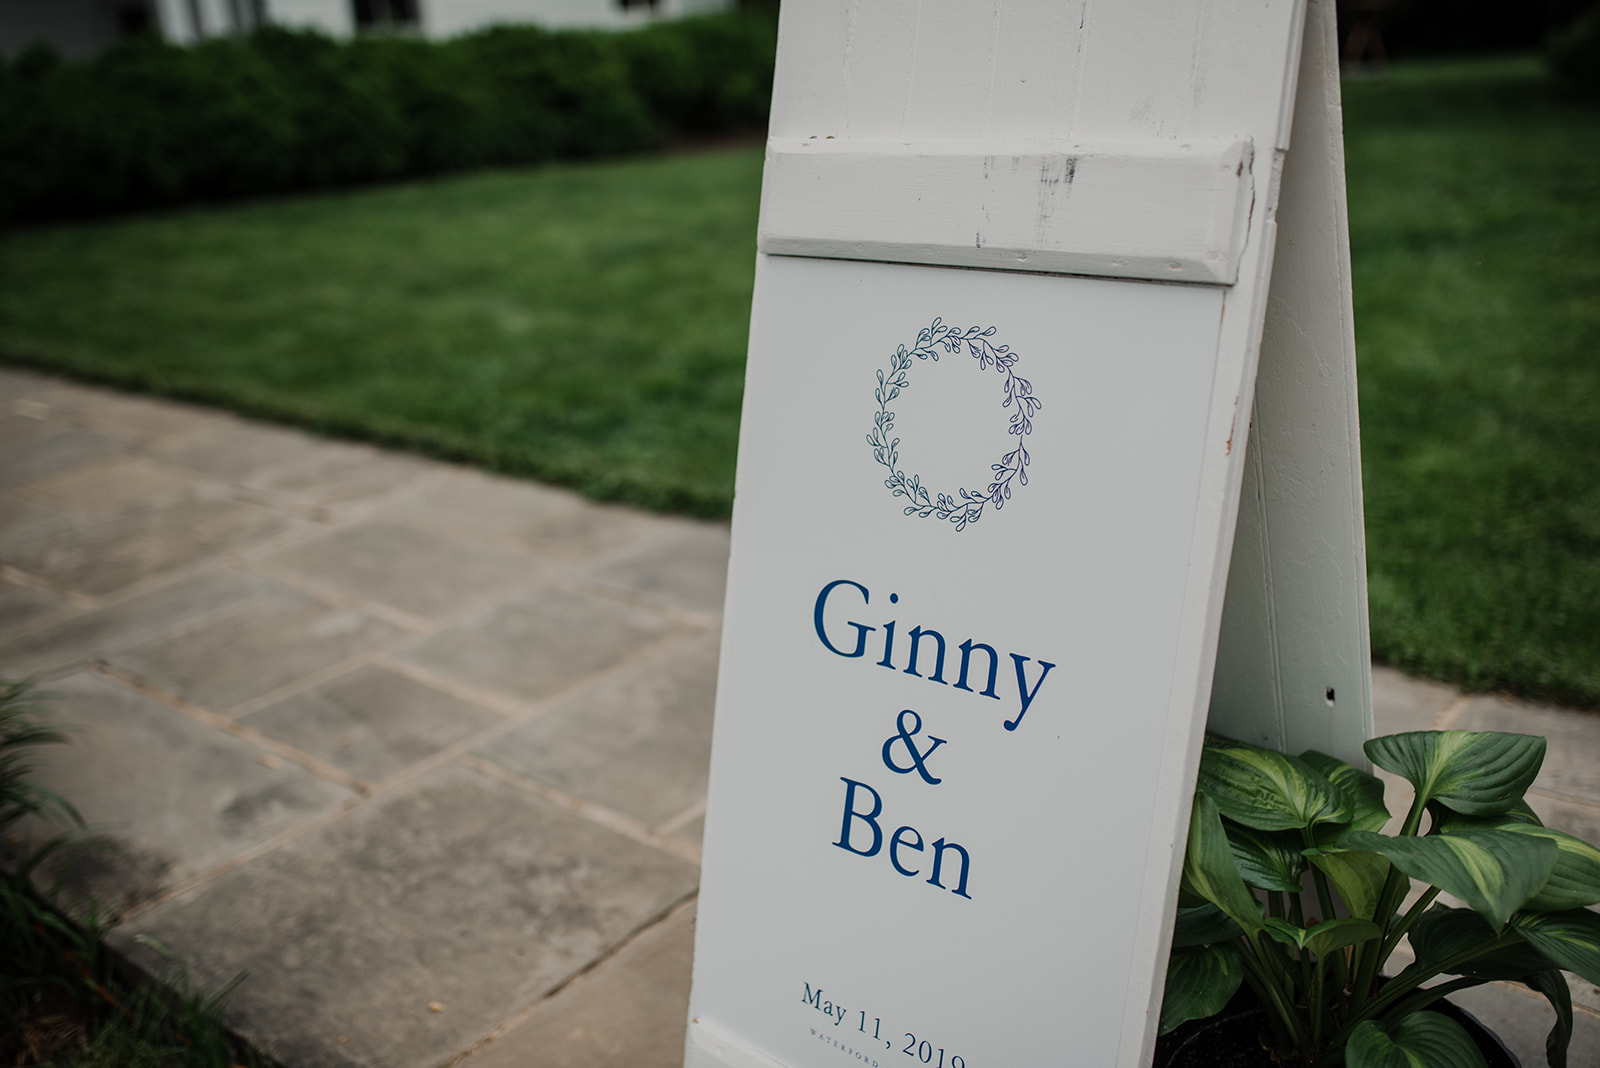 The bride and groom's names appear on a sign outside of their outdoor wedding ceremony at Blue Hill Farm in Waterford, VA.